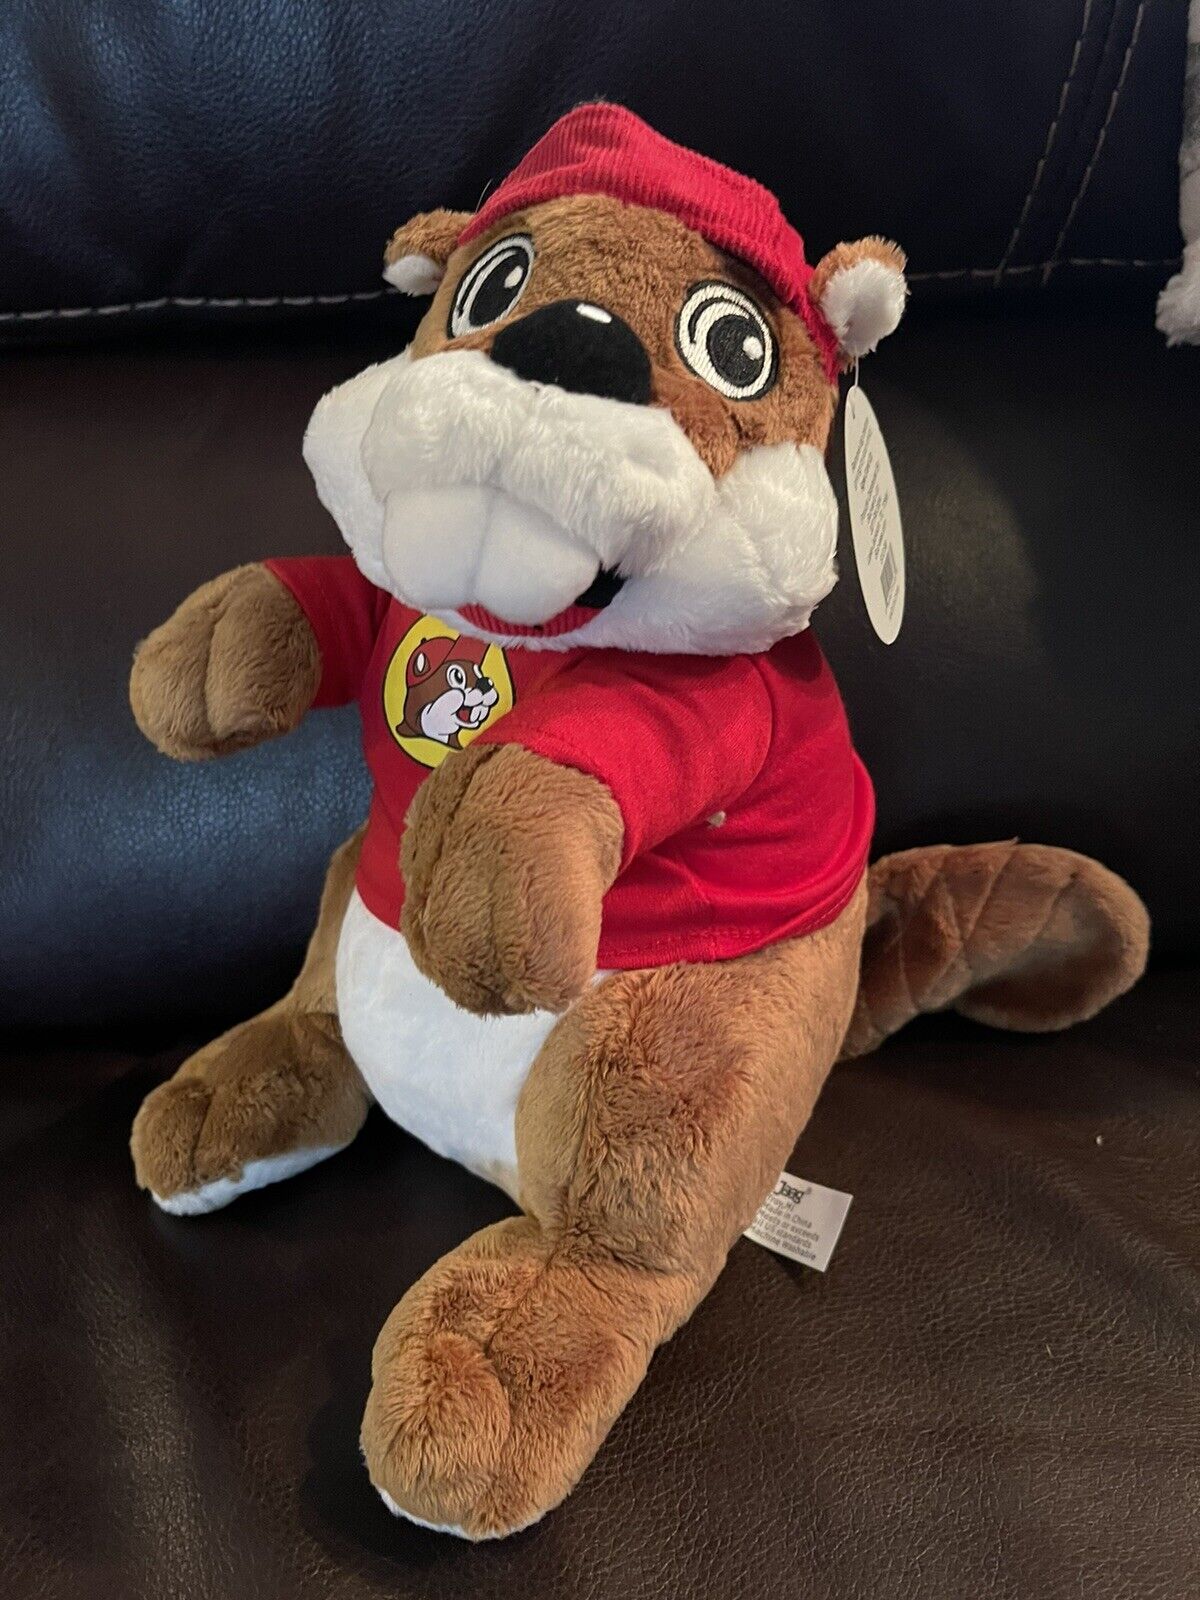 Buc-ees Plush Bucky The Beaver Stuffed Animal, Ages 3 and Up, 12 Inches Tall NWT